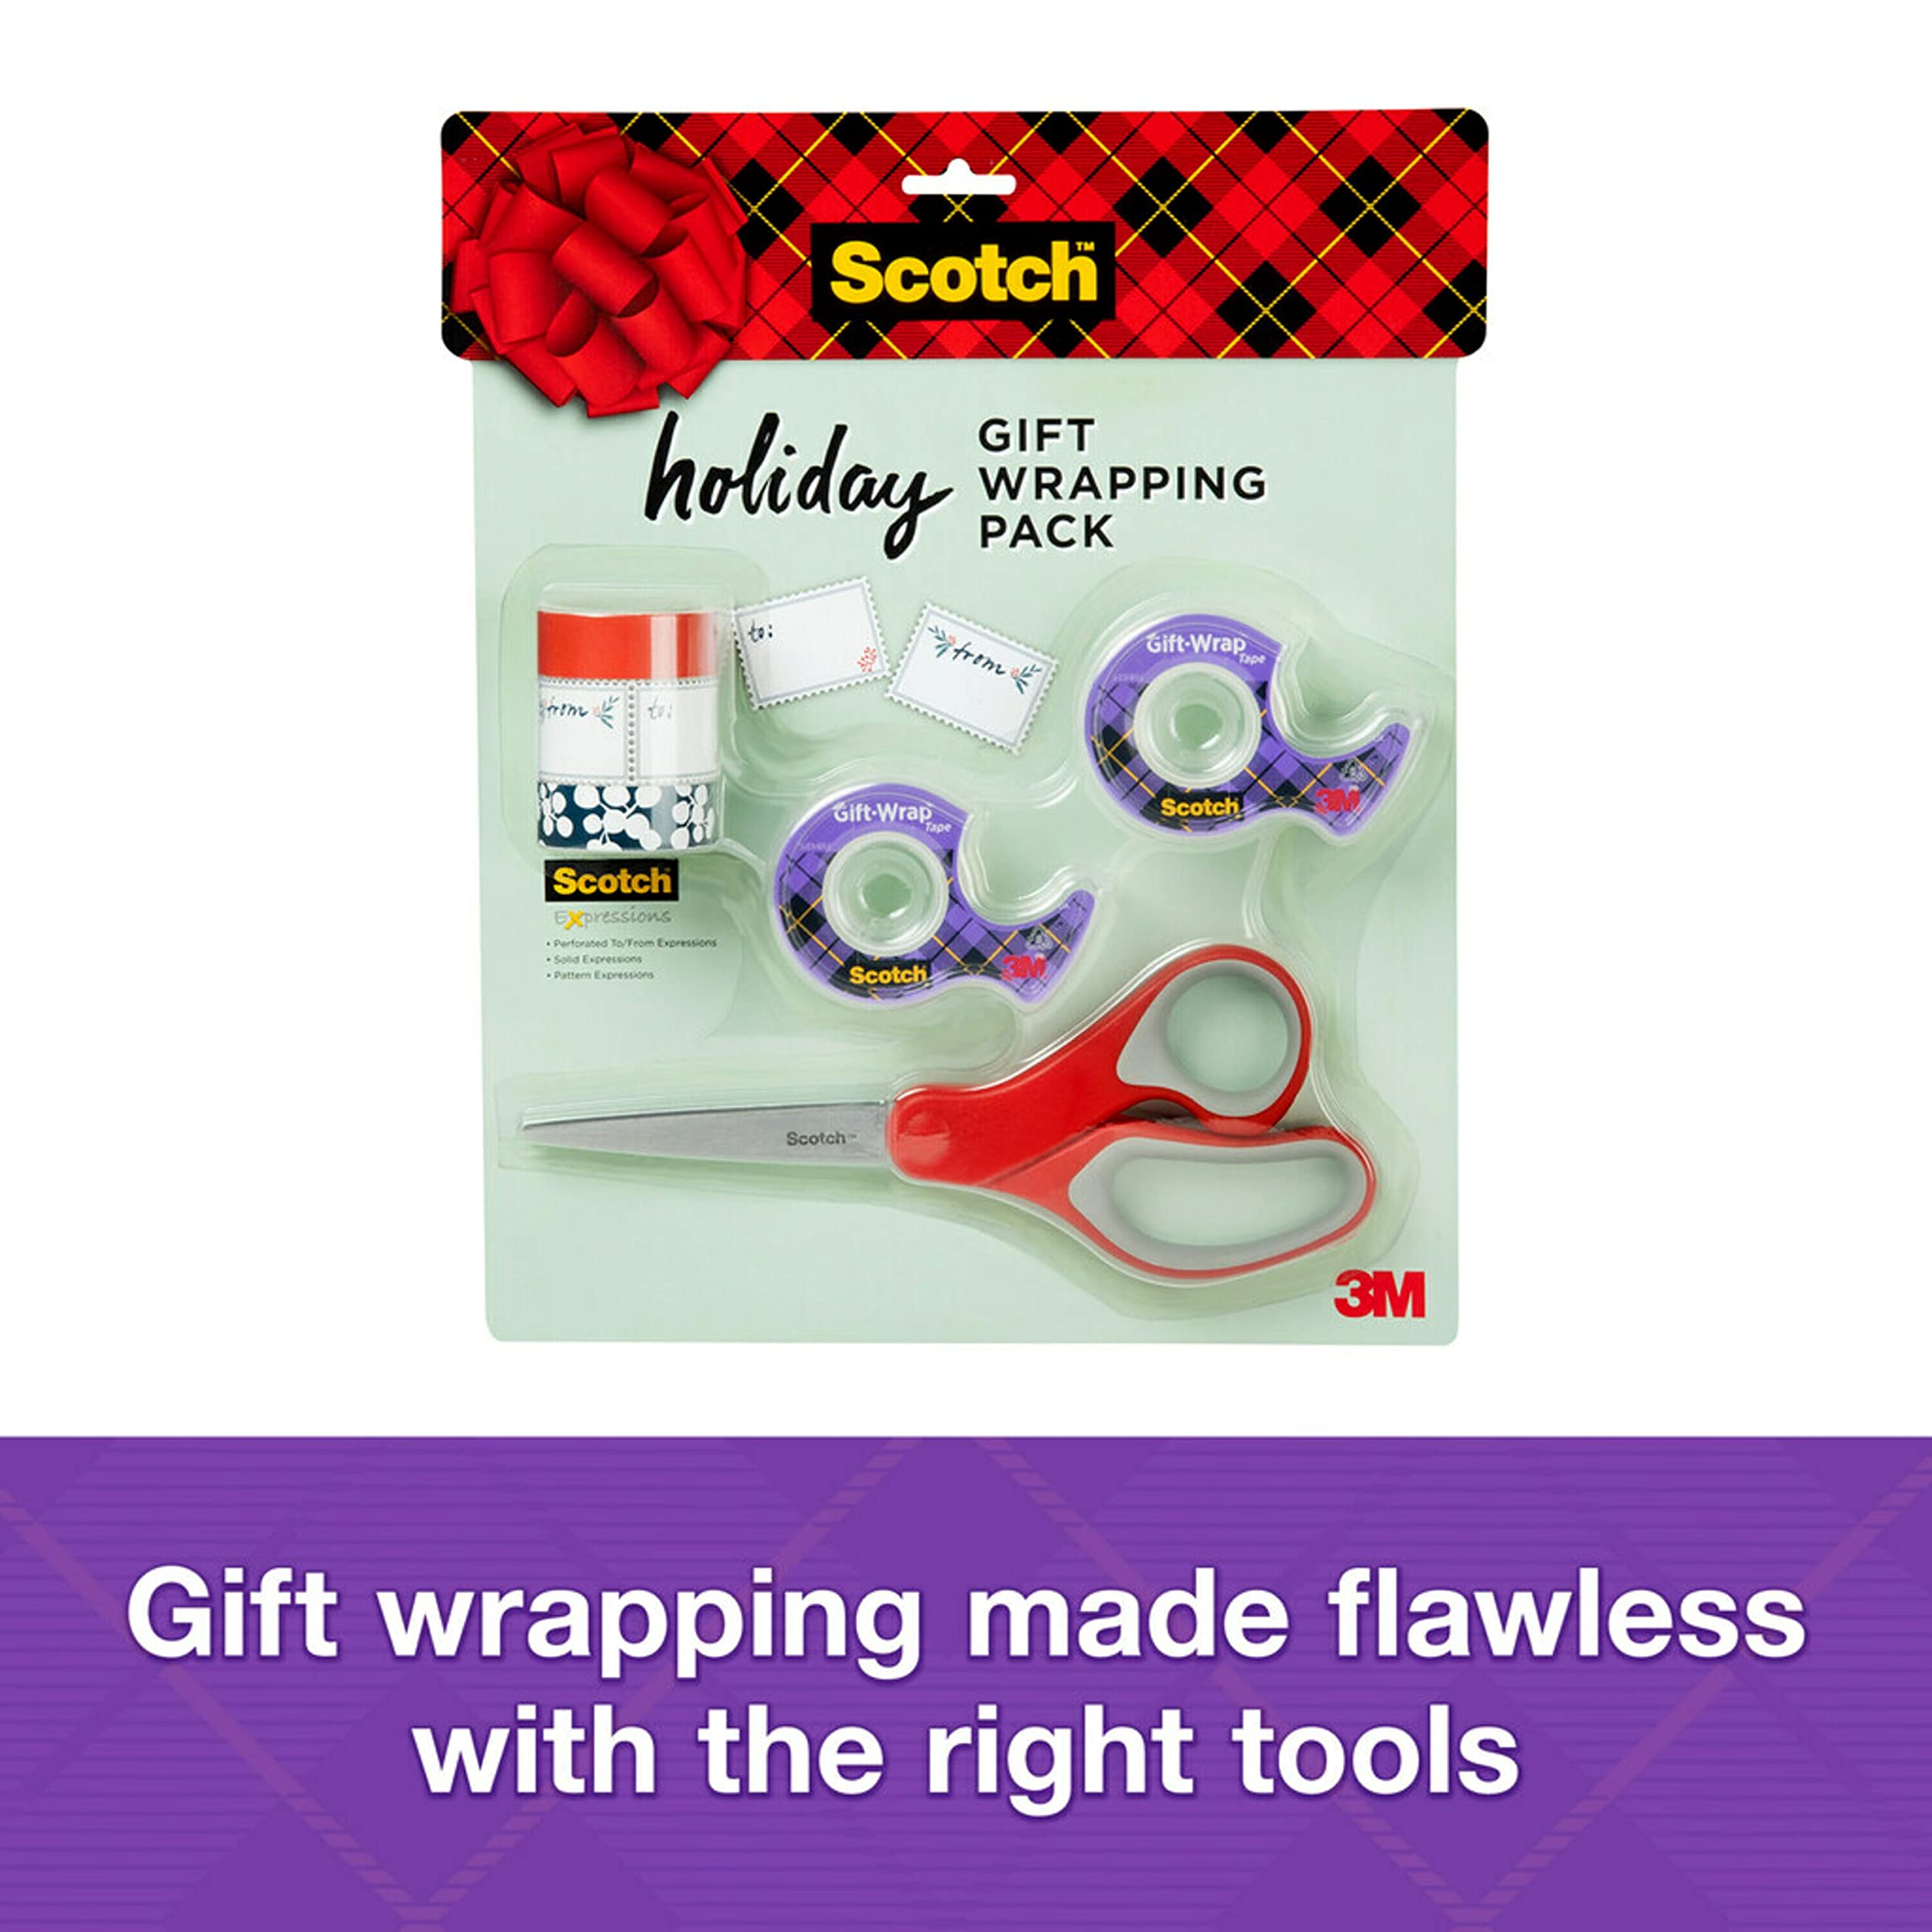 Scotch Gift Wrap Tape Kit, Wrapping/Art Supplies Set with Cute Washi Tape, To/From Labels, Sharp Scissors for Office, and Scotch Tape for Gift Wrapping, Scrapbooking, and Journaling